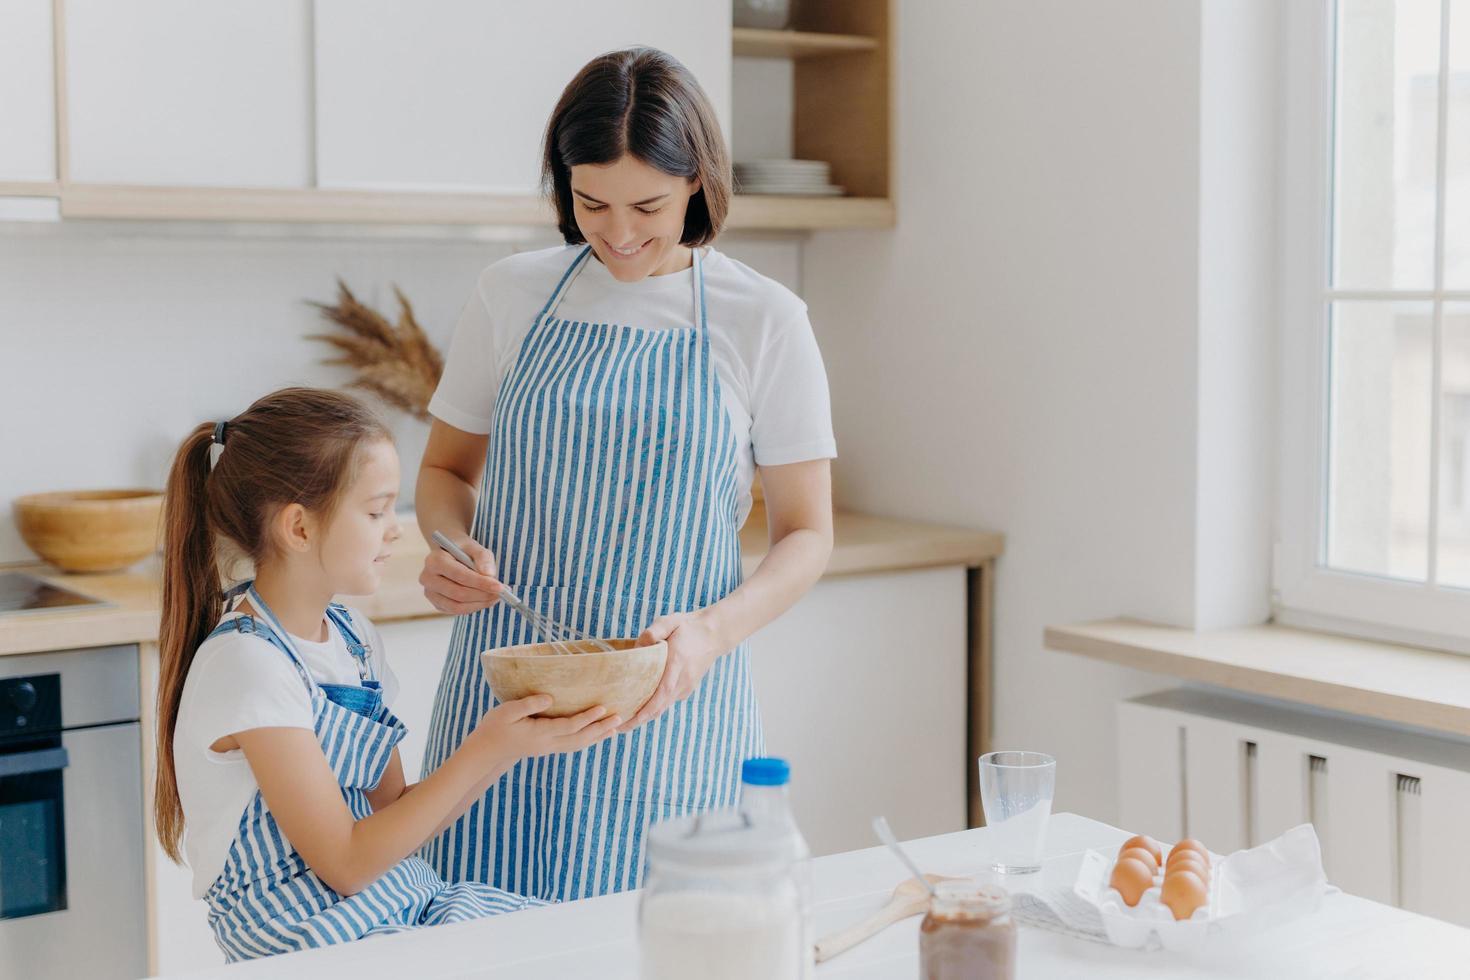 Happy family at kitchen. Lovely woman and her daughter prepare bakery together, wear aprons, like cooking together, enjoy domestic atmosphere, have fun indoor. Children, motherhood, baking concept photo